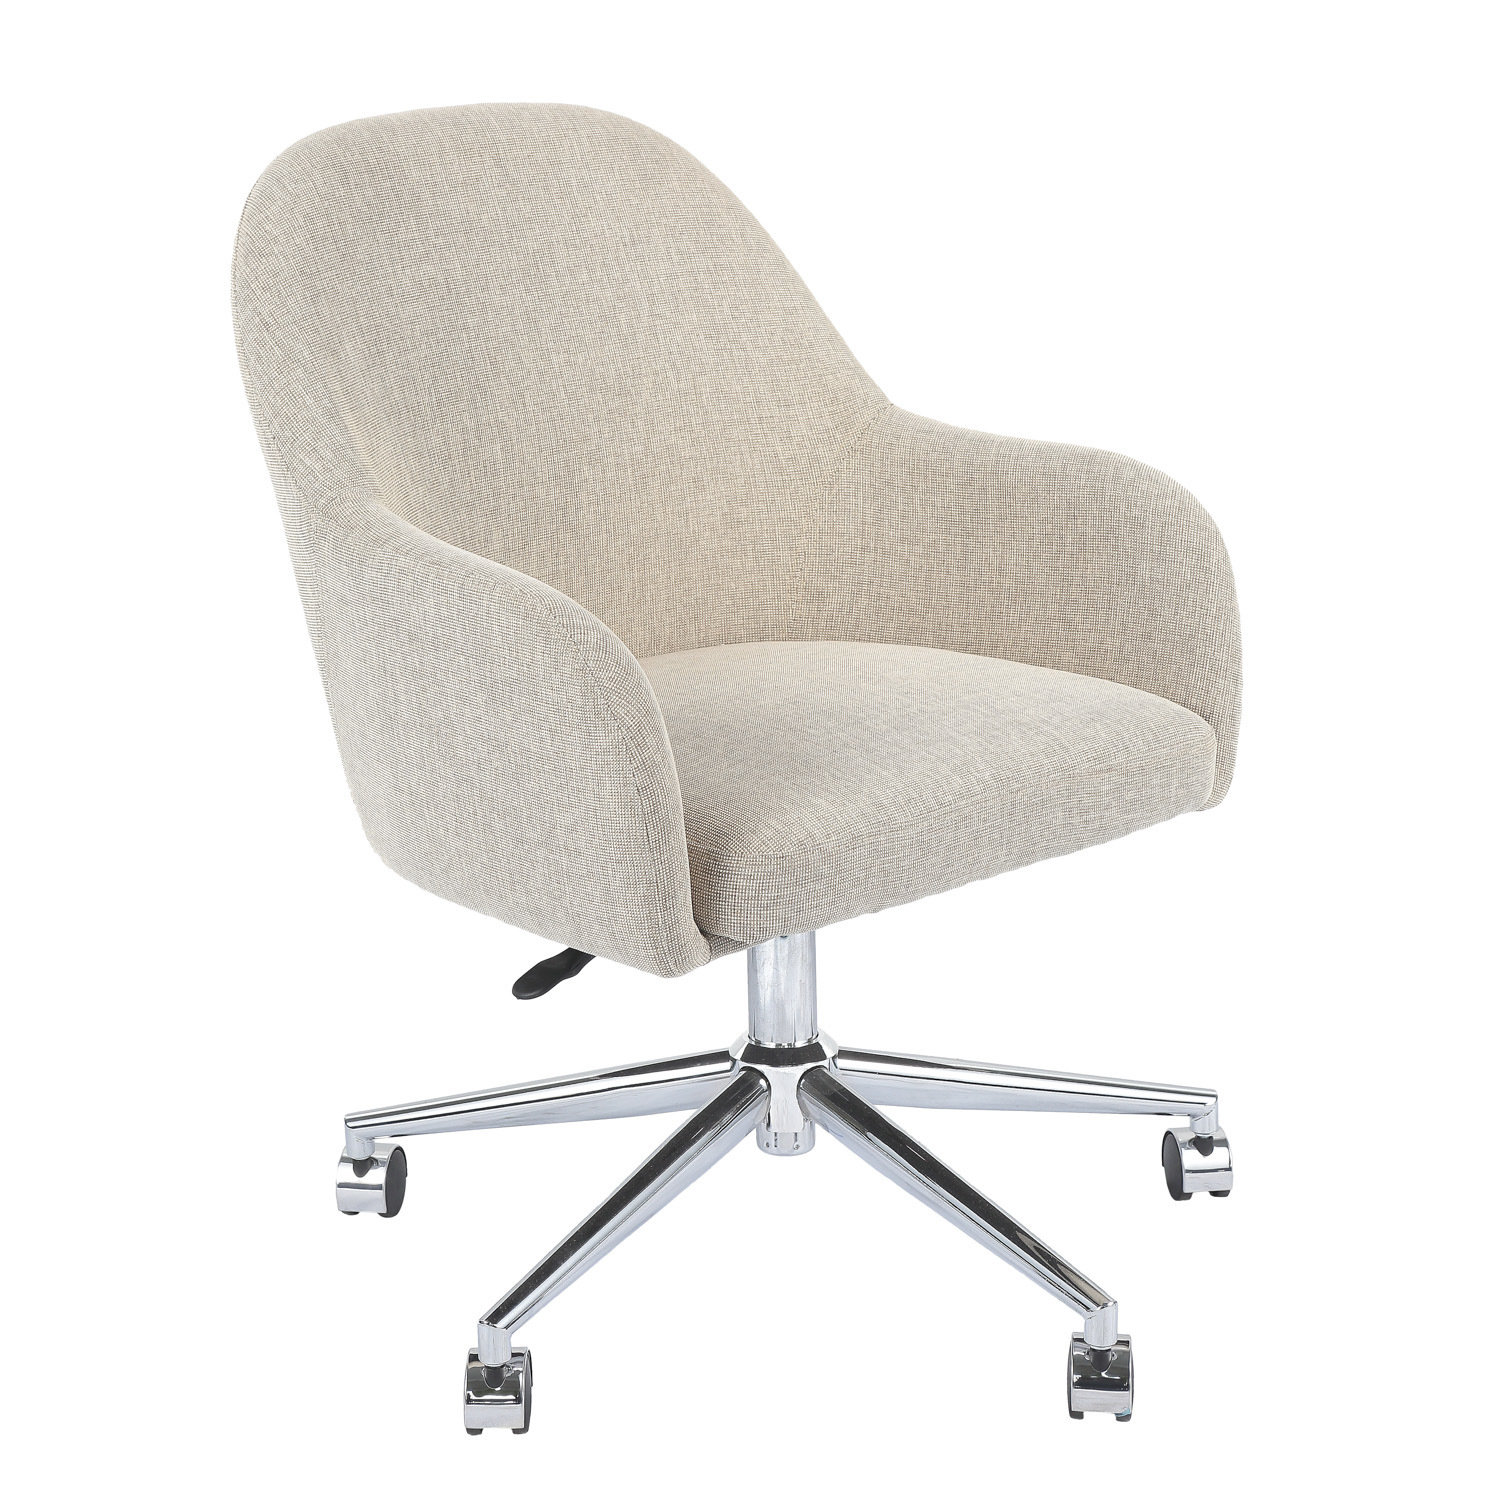 Modern Task Chair for Office with Fabric Upholstered